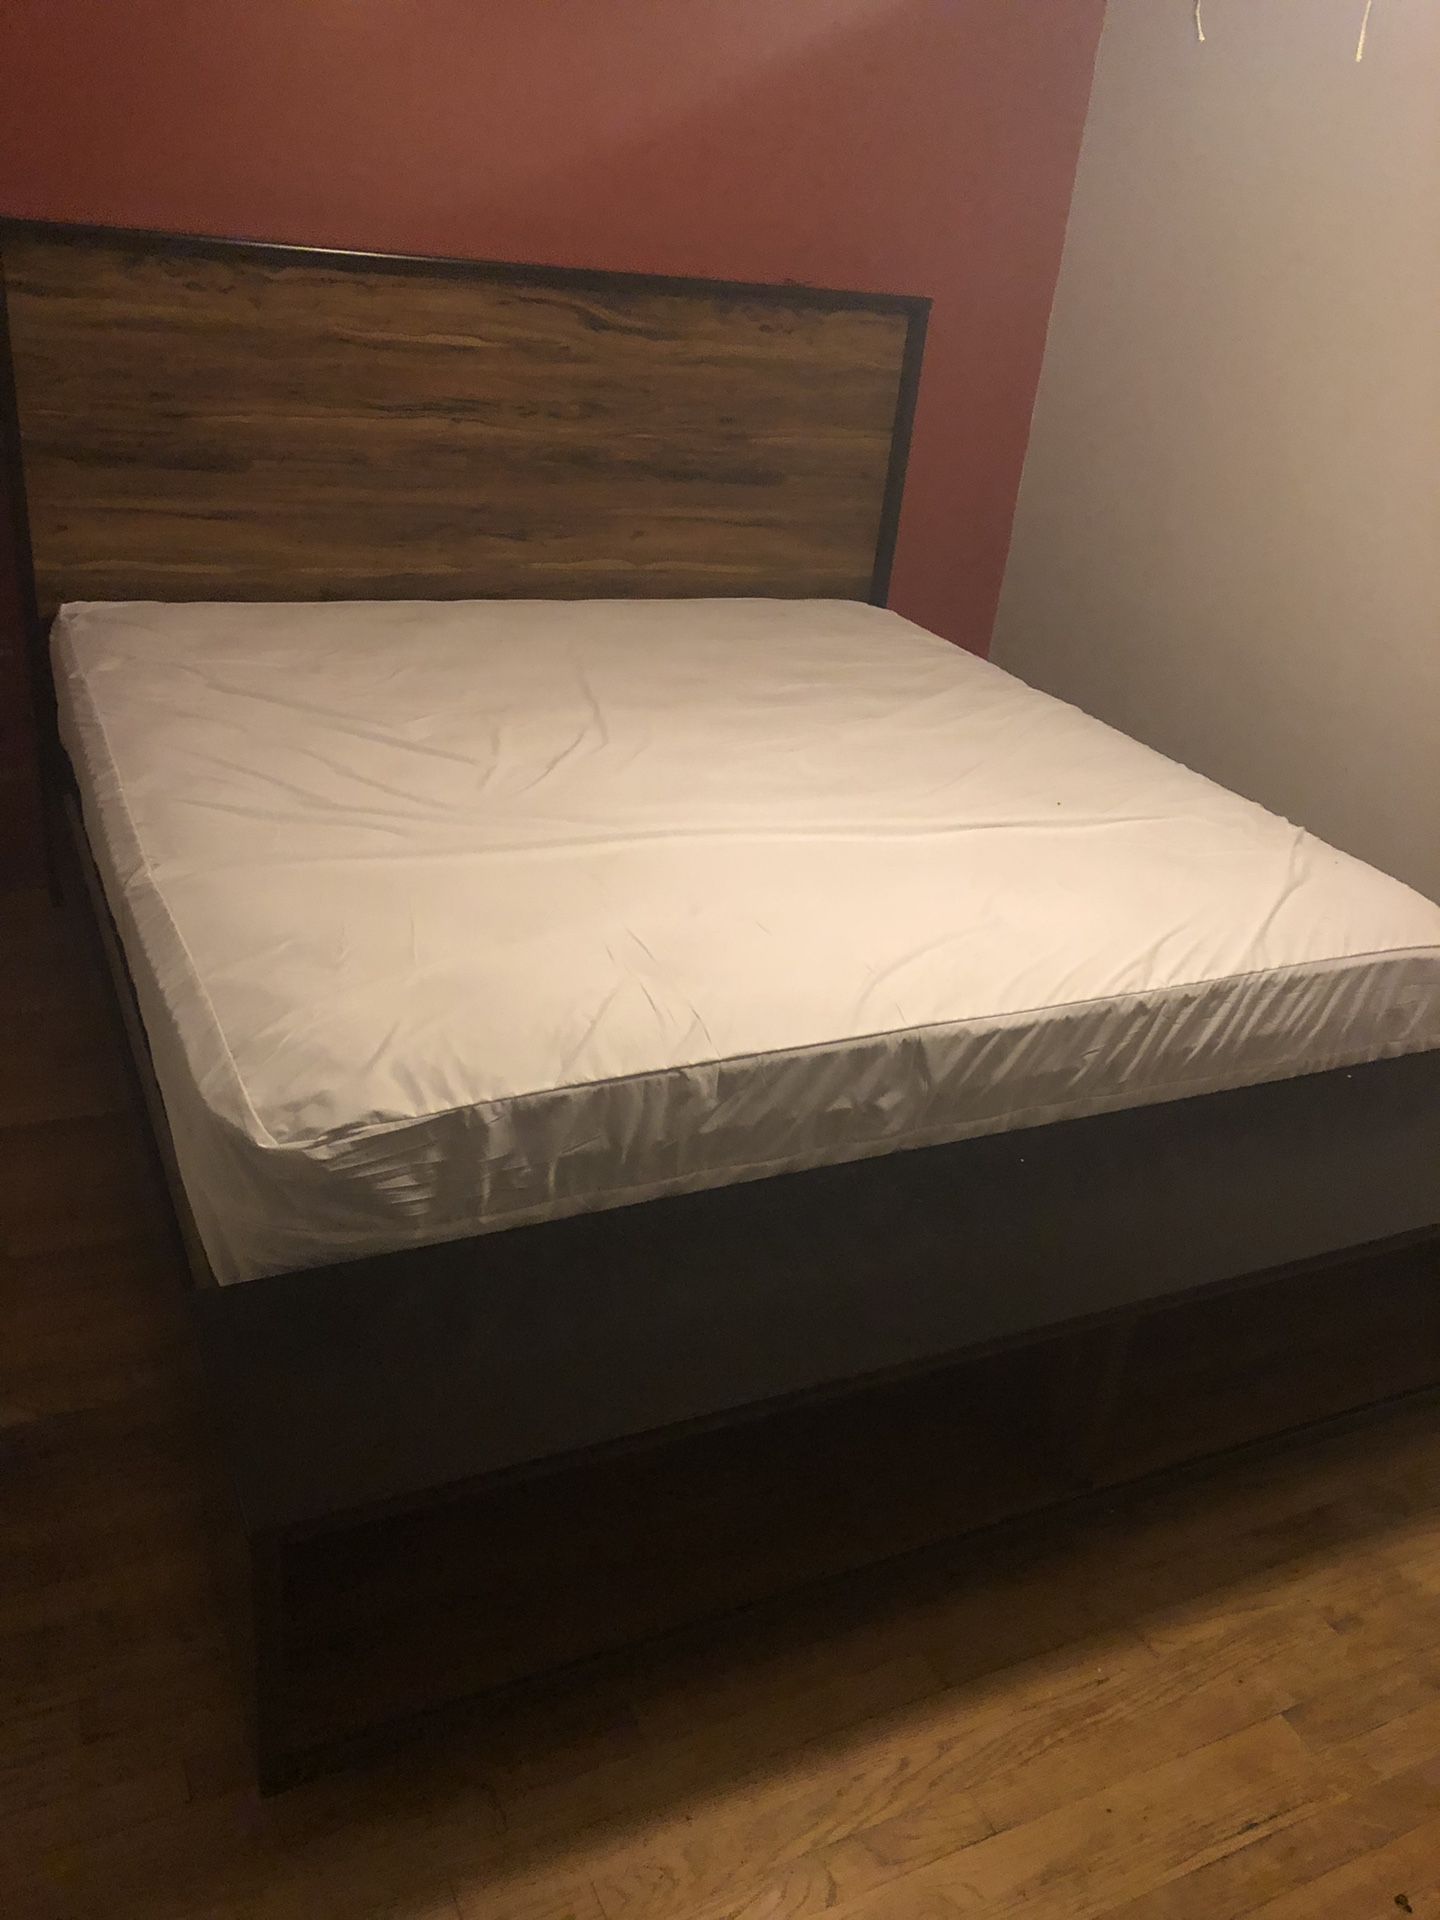 Brand new kind size pillow top bed with frame